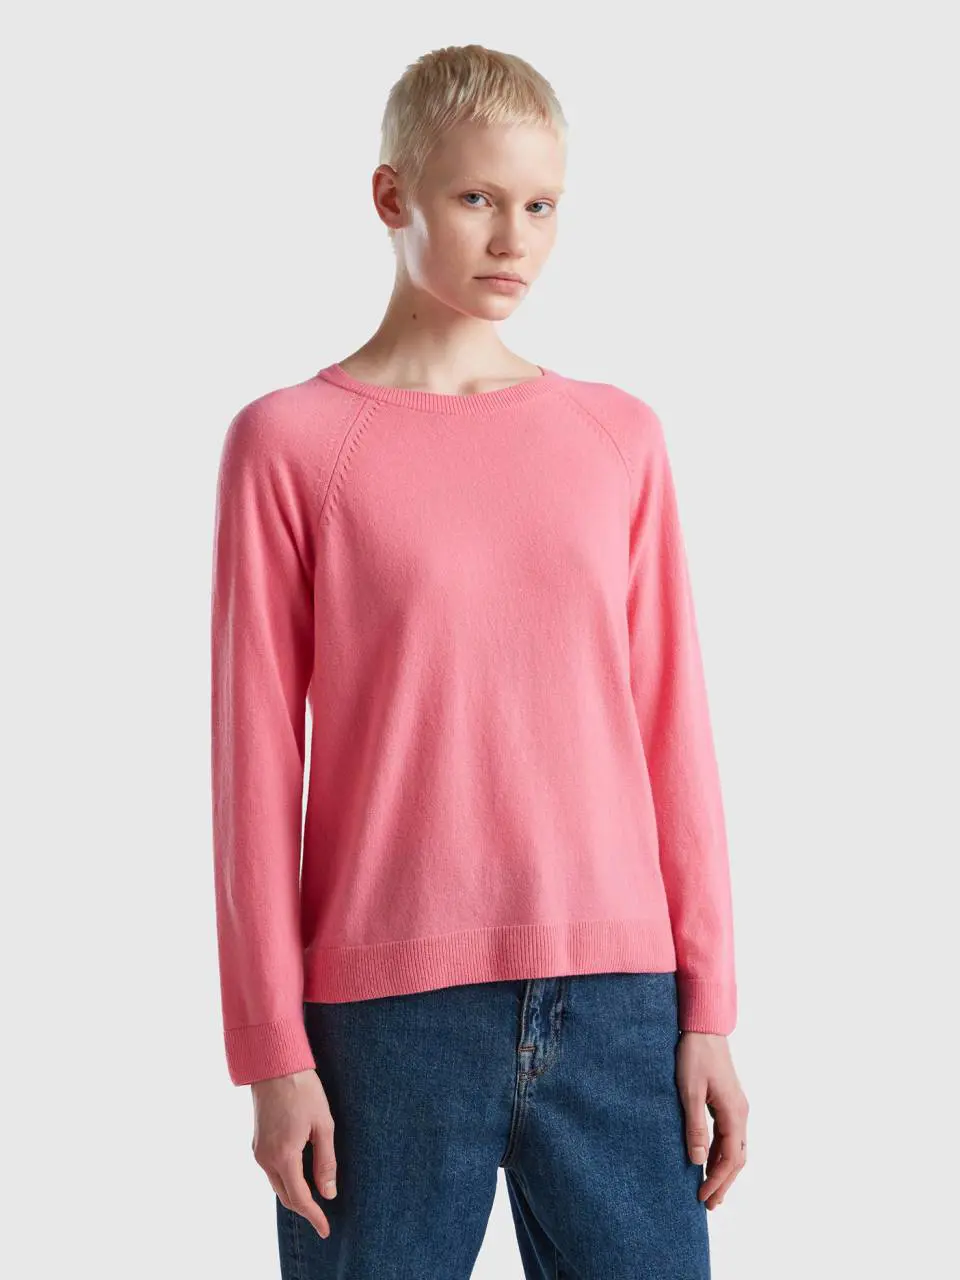 Benetton pink crew neck sweater in cashmere and wool blend. 1